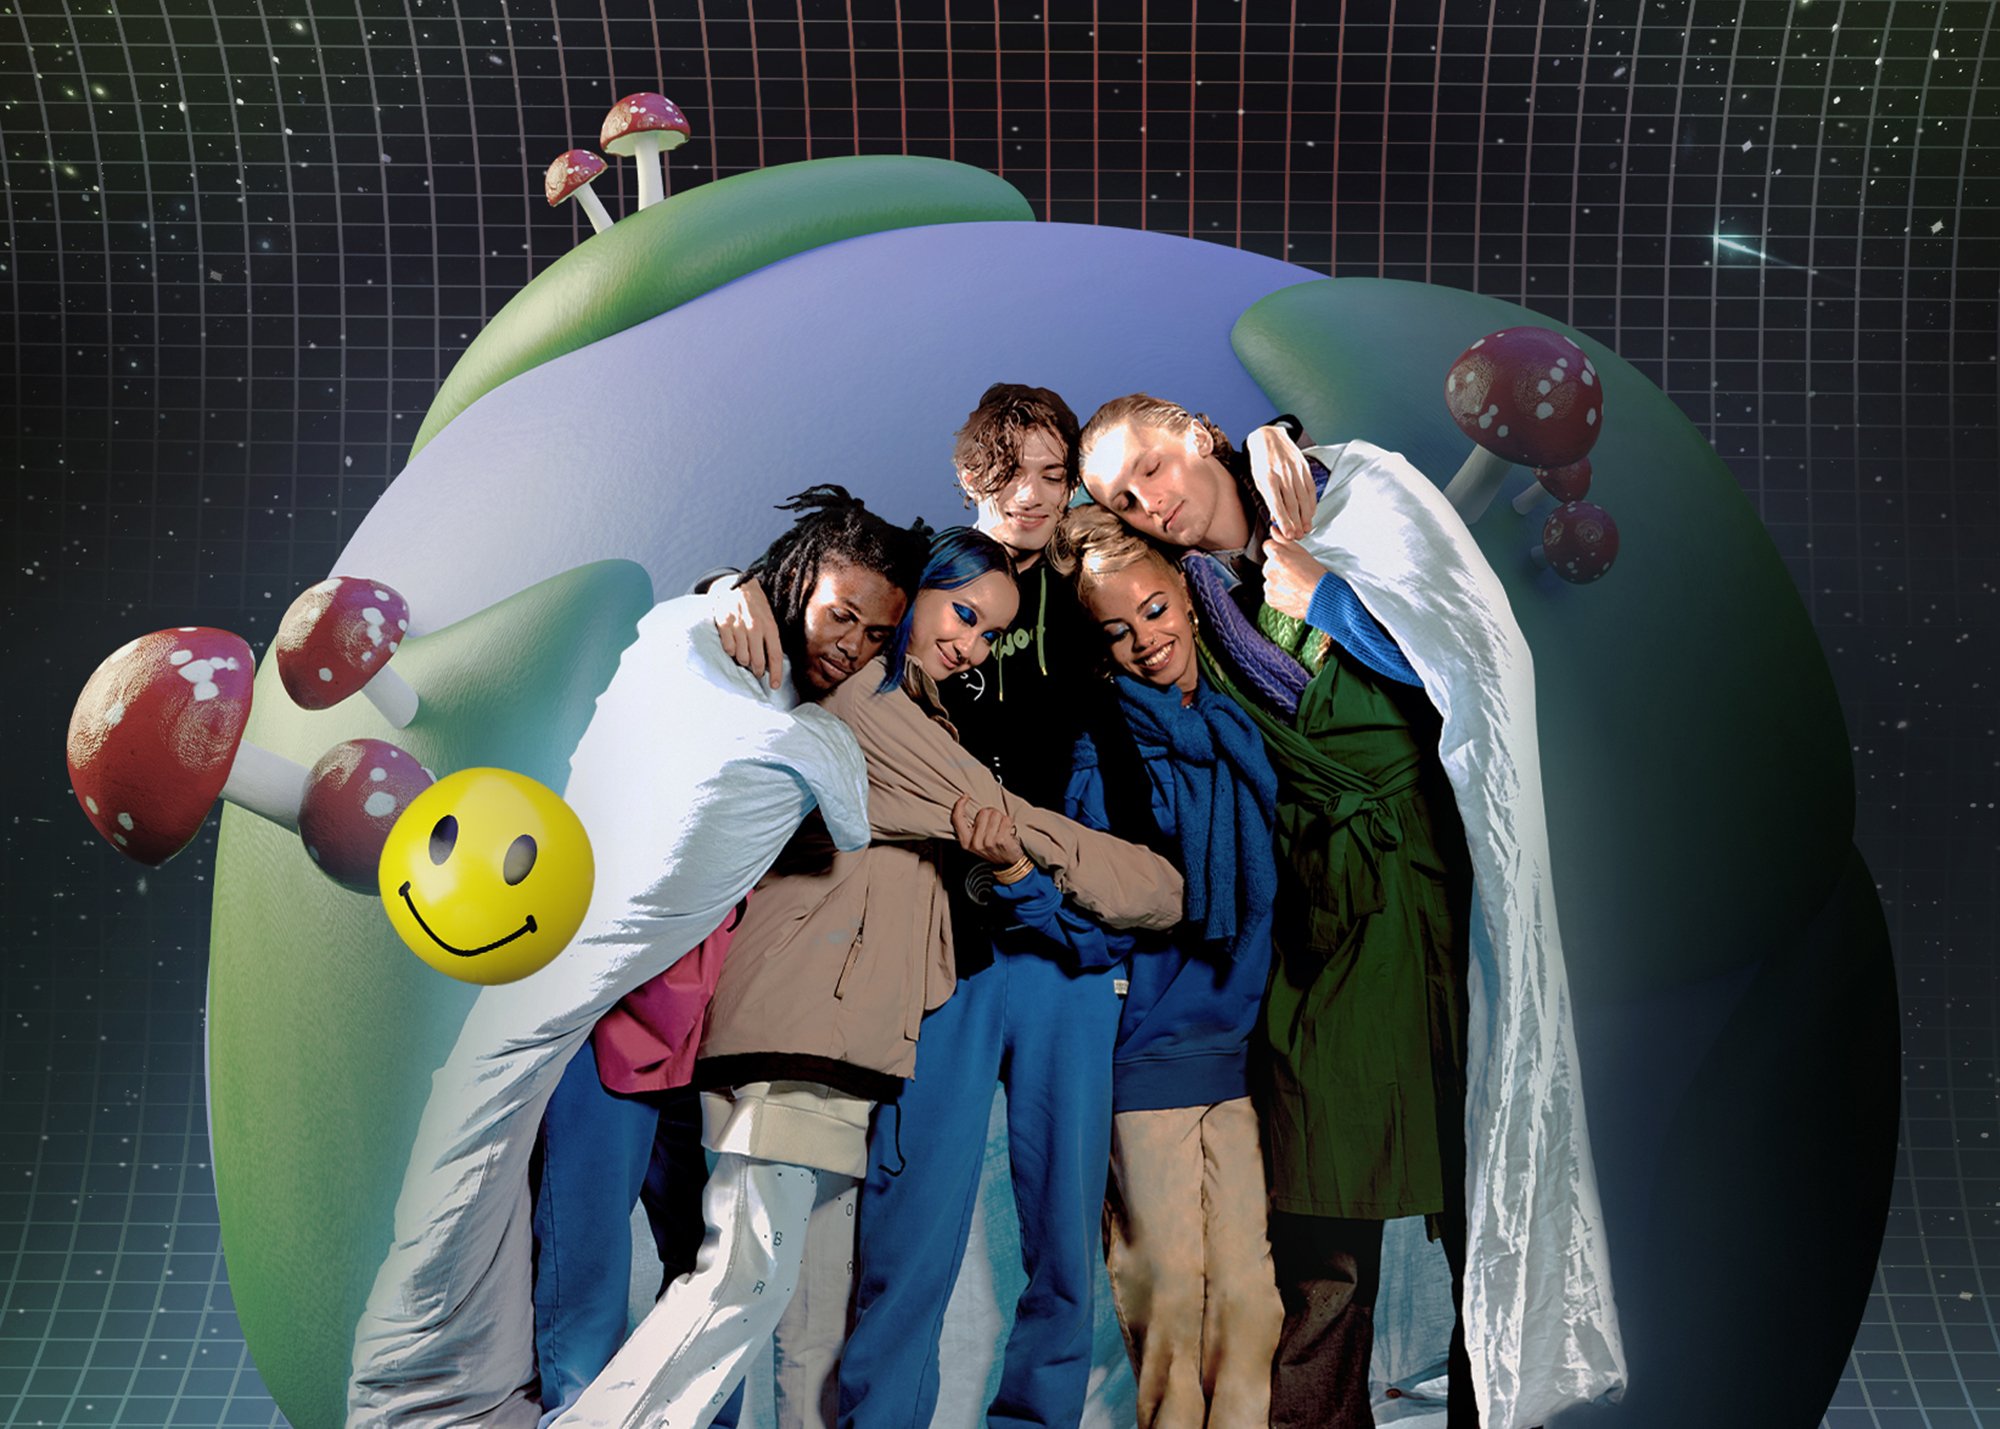 A campaign photo for the marketplace, with a group of models hugging against a background of a planet, a smiley face, and mushrooms.